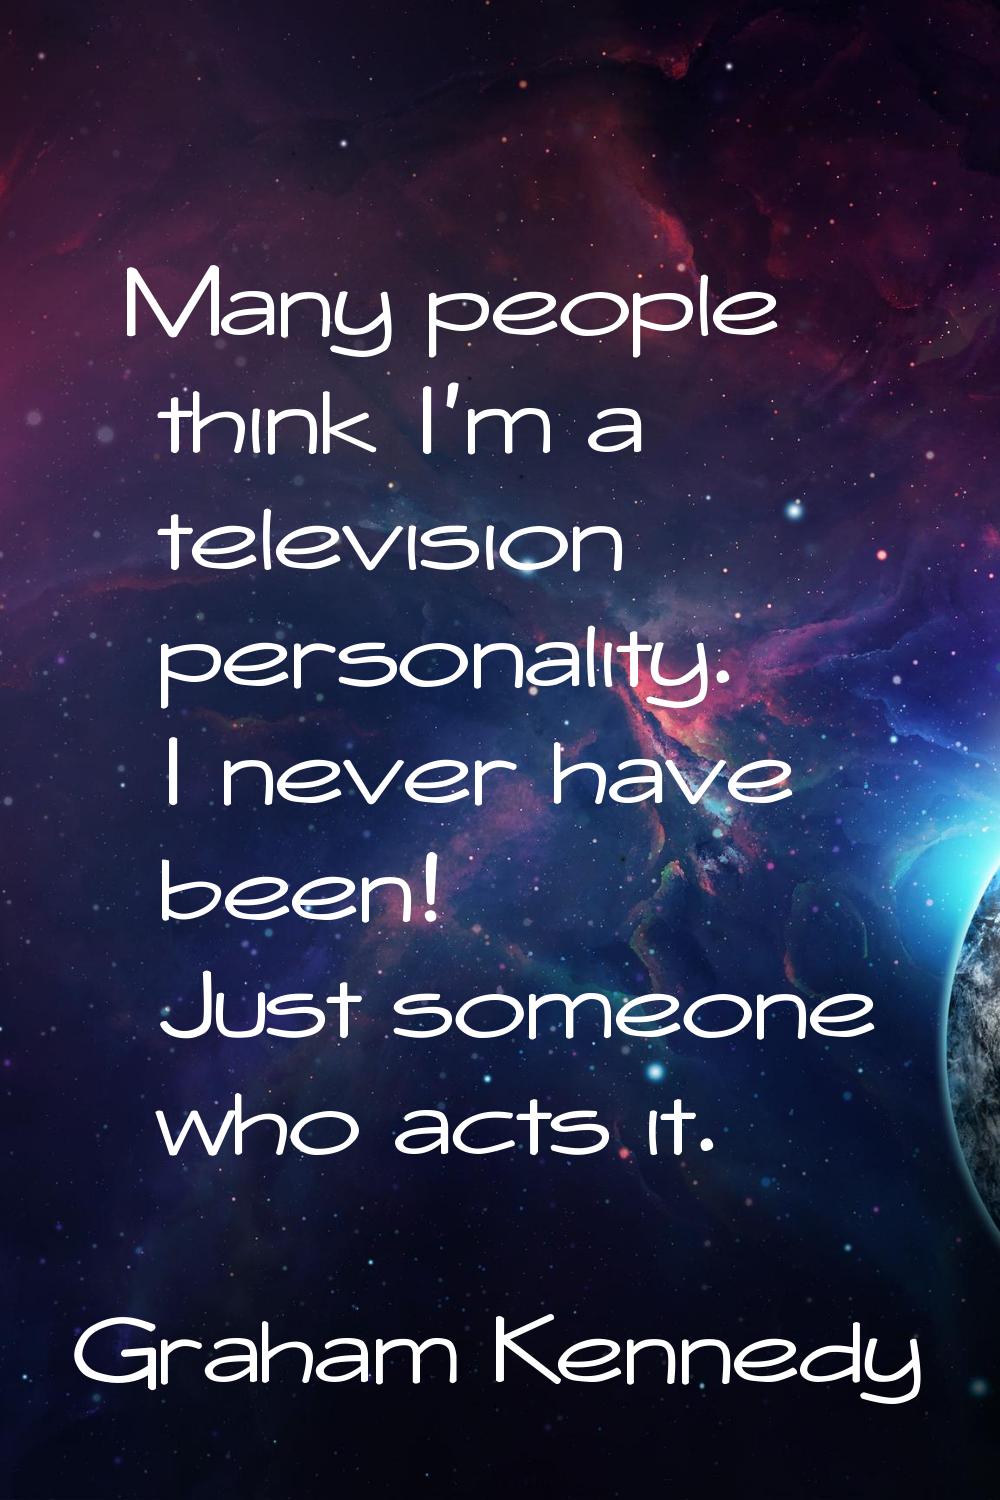 Many people think I'm a television personality. I never have been! Just someone who acts it.